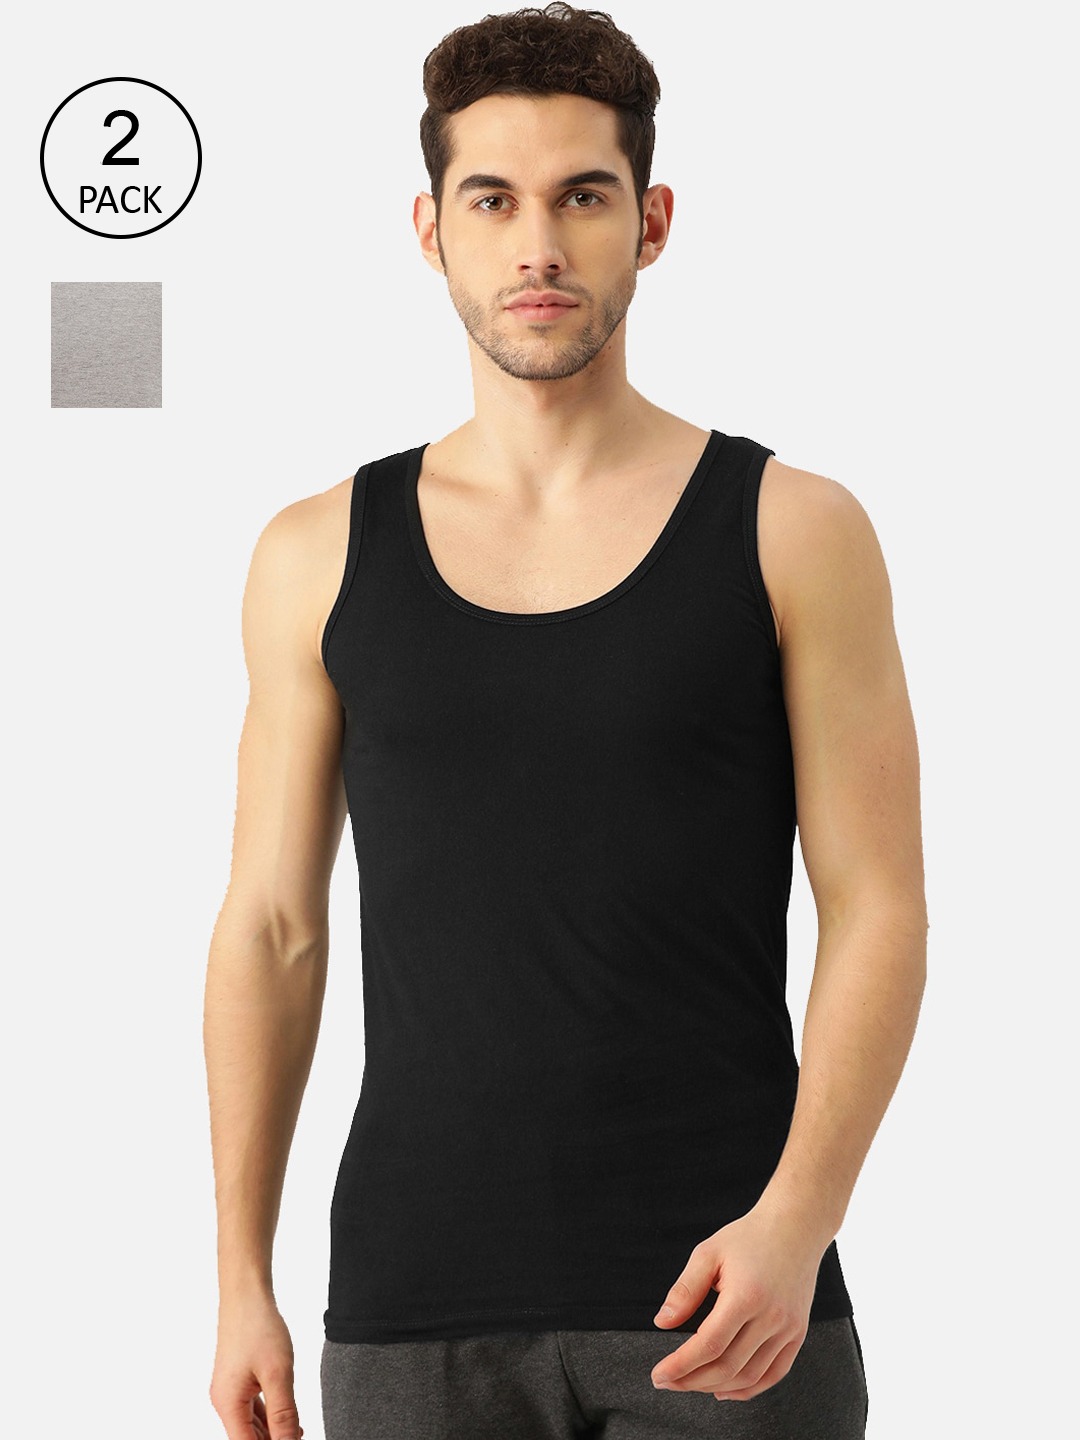 Clothing Innerwear Vests | ROMEO ROSSI Pack Of 2 Black & Grey Cotton Vests - QN01784